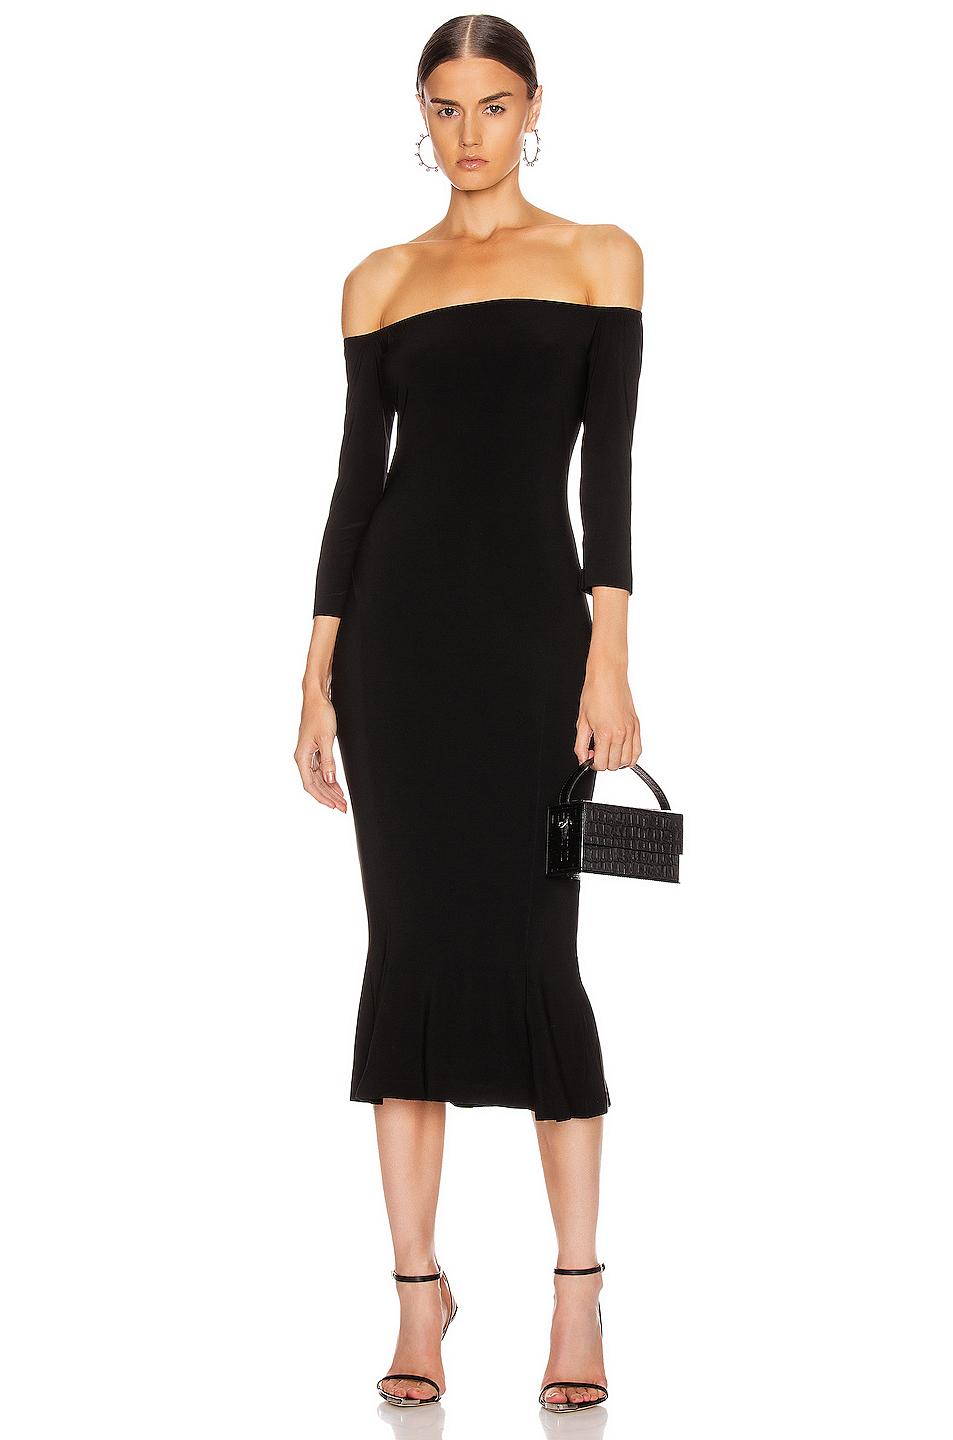 Norma Kamali Synthetic Off Shoulder Fishtail Dress in Black - Lyst